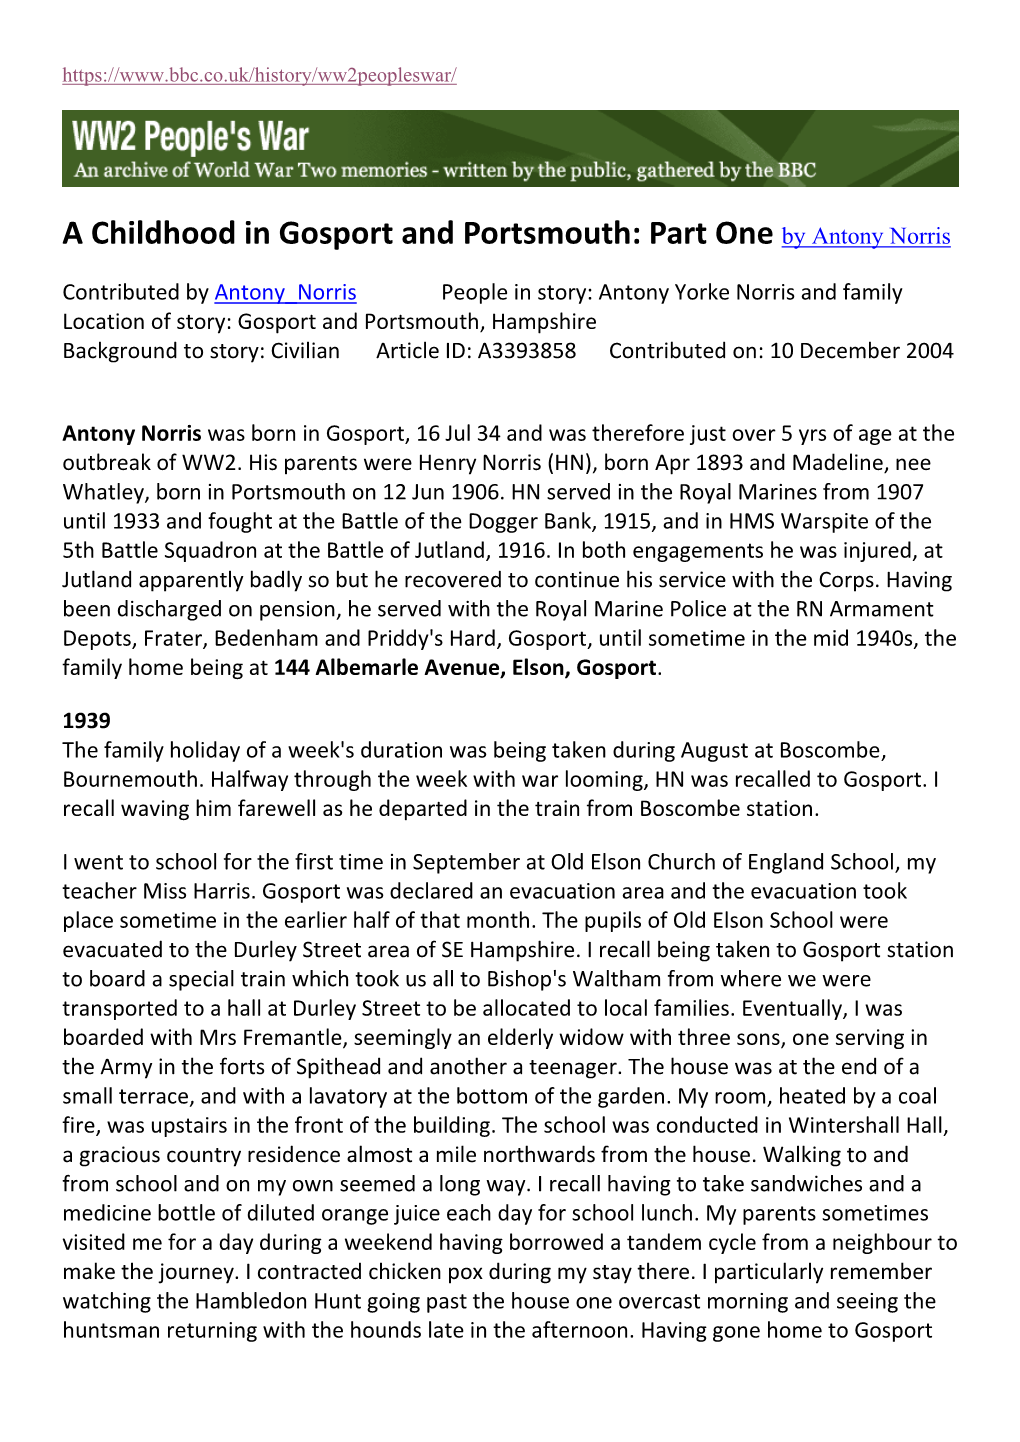 A Childhood in Gosport and Portsmouth: Part One by Antony Norris